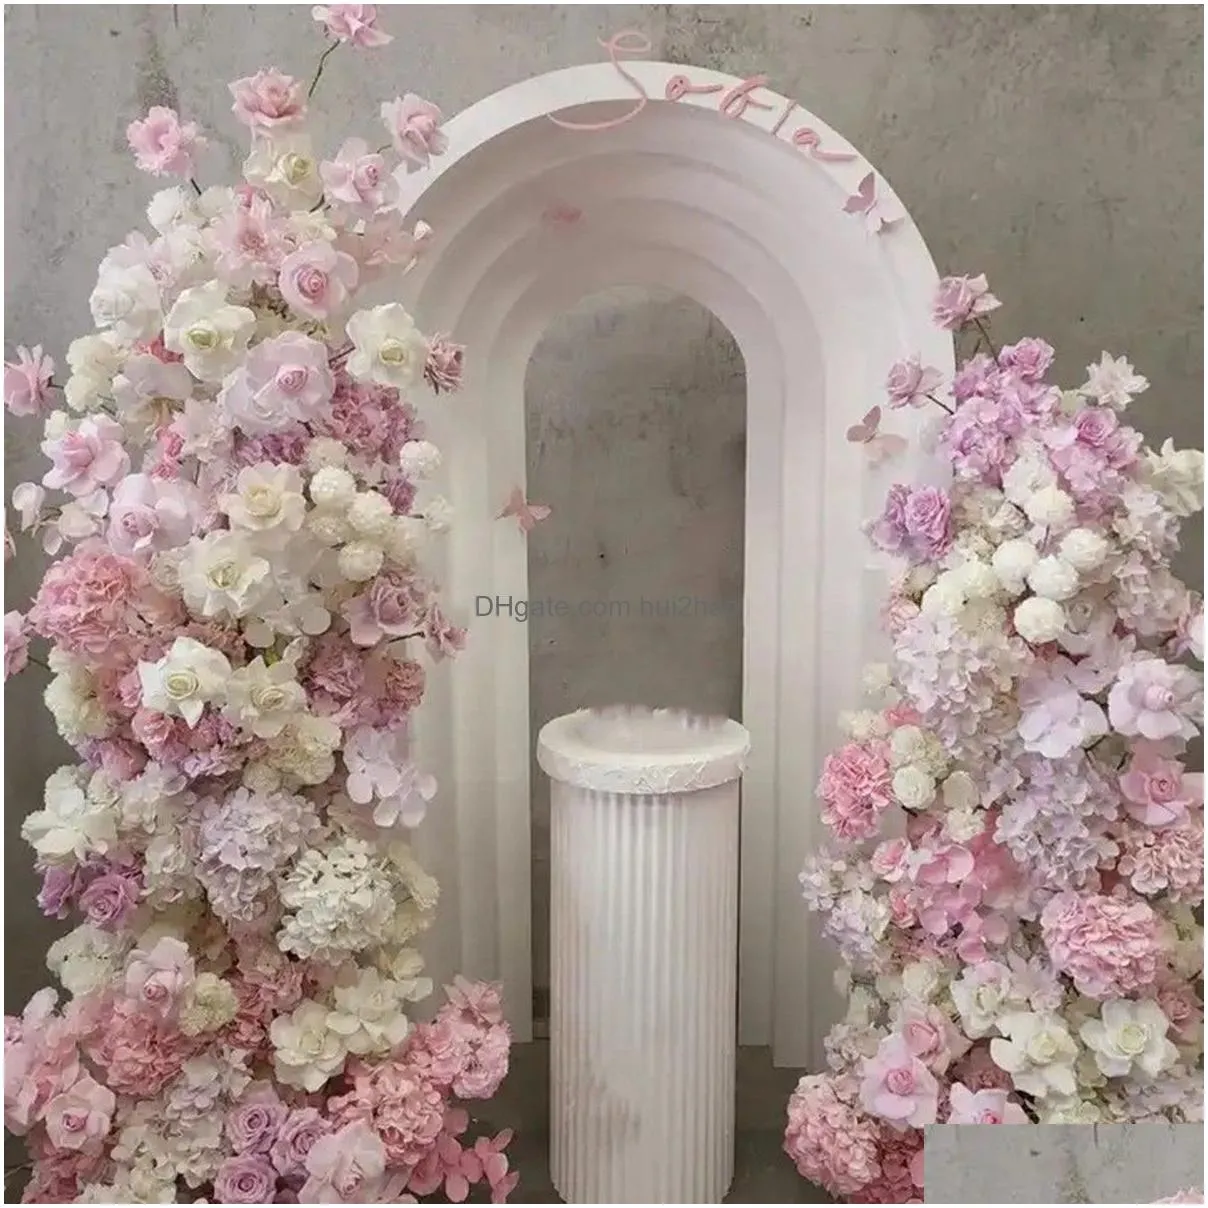 no flowers no including decoration itemwedding decorations acrylic arch backdrop stand s flower stand wedding supplies wedding events stage background arch